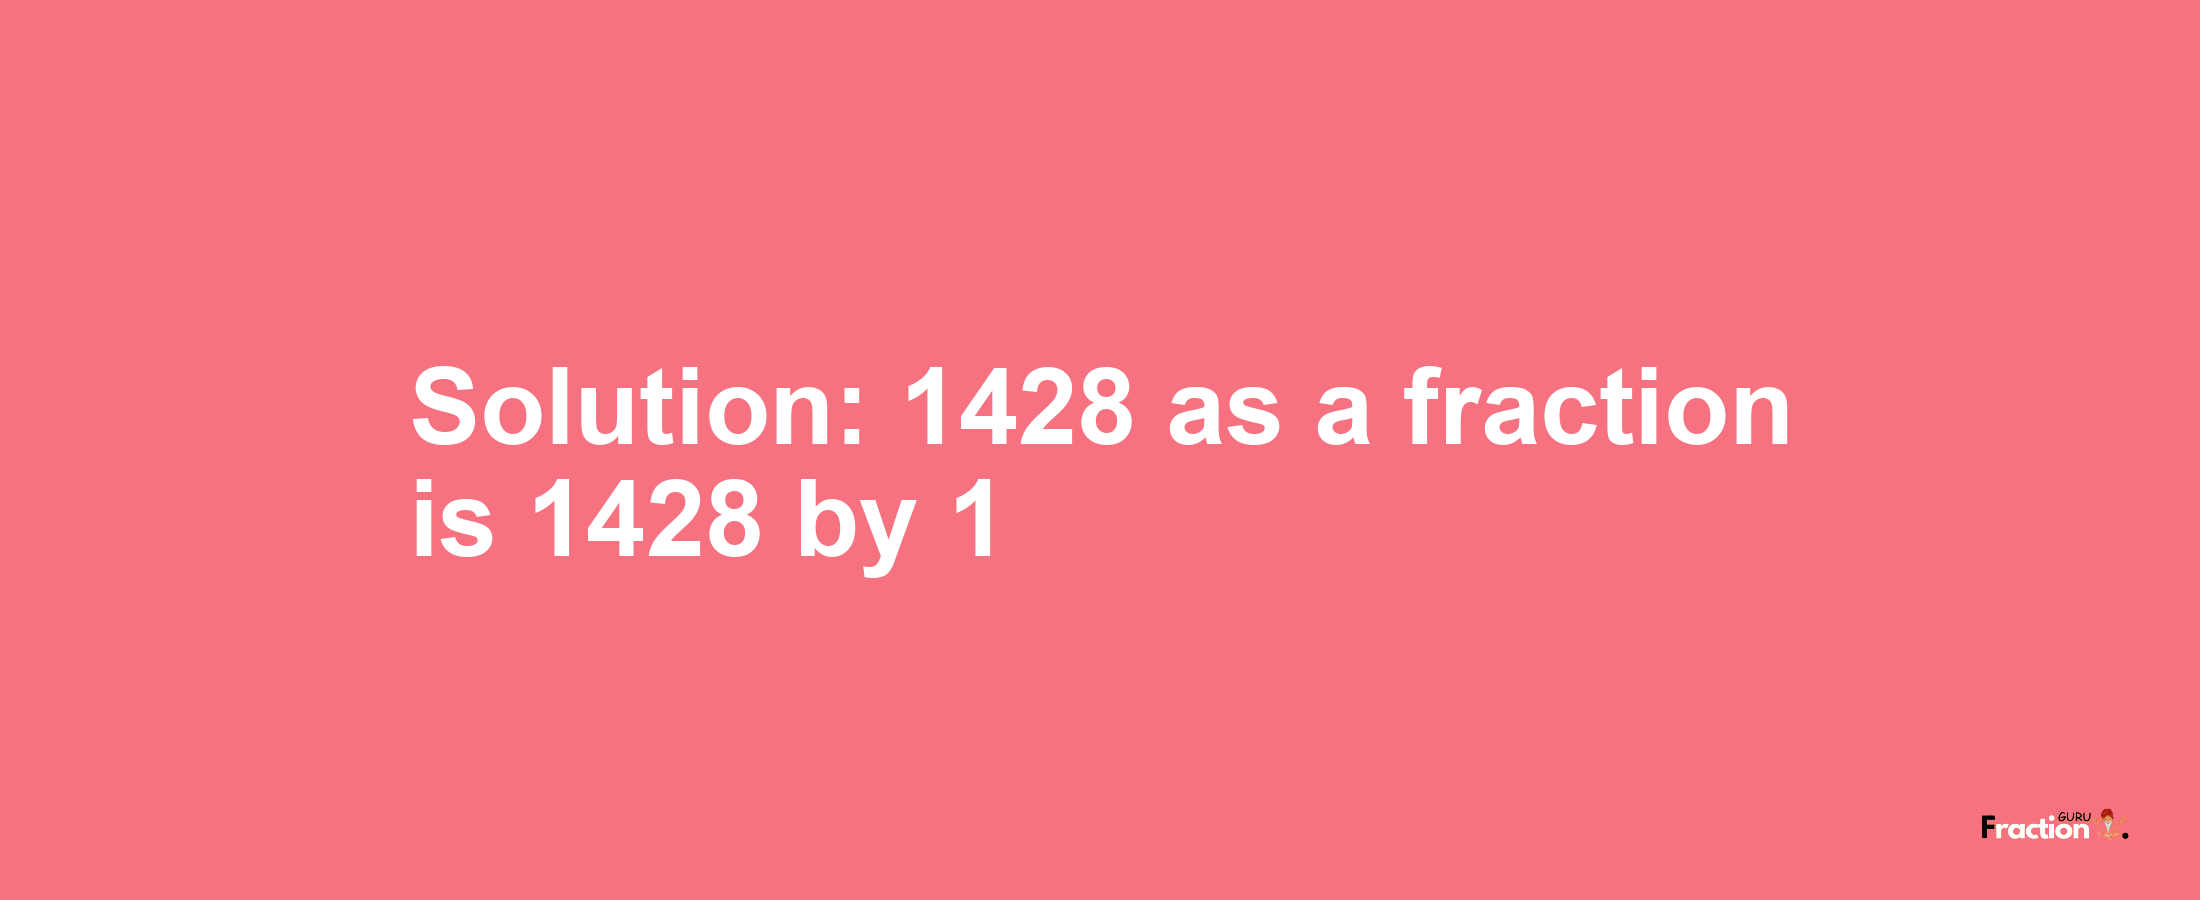 Solution:1428 as a fraction is 1428/1